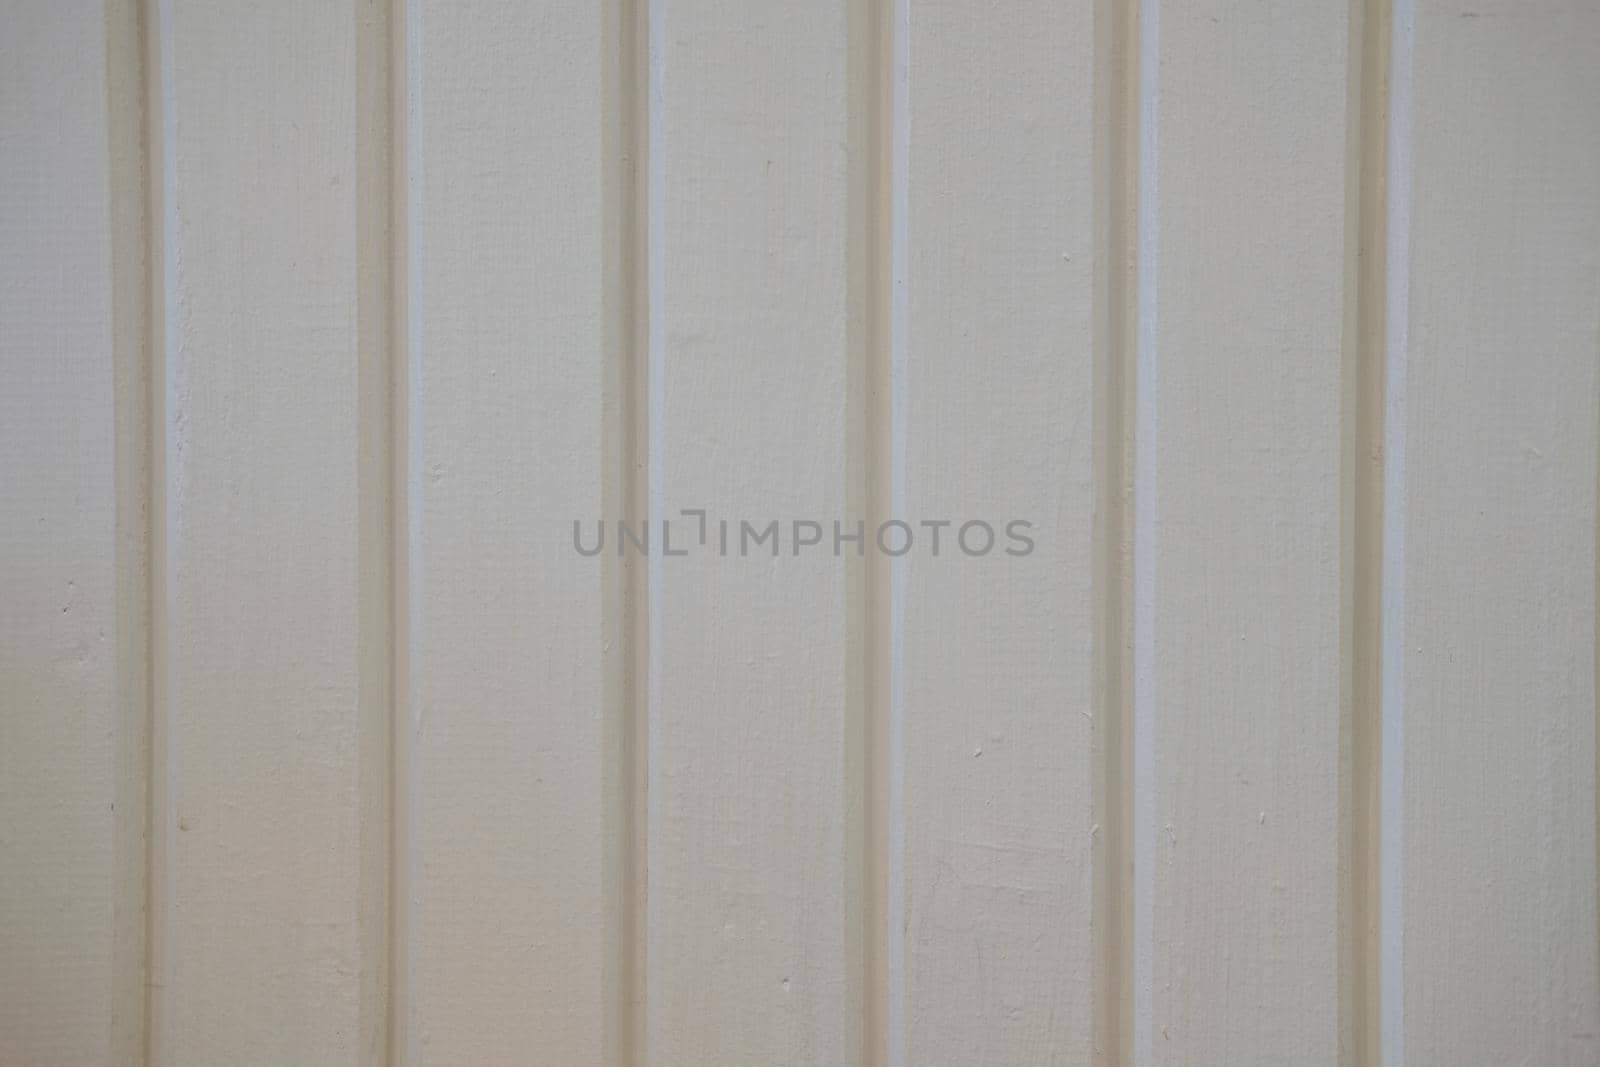 brown wood planks texture with natural pattern, abstract background for design and decoration